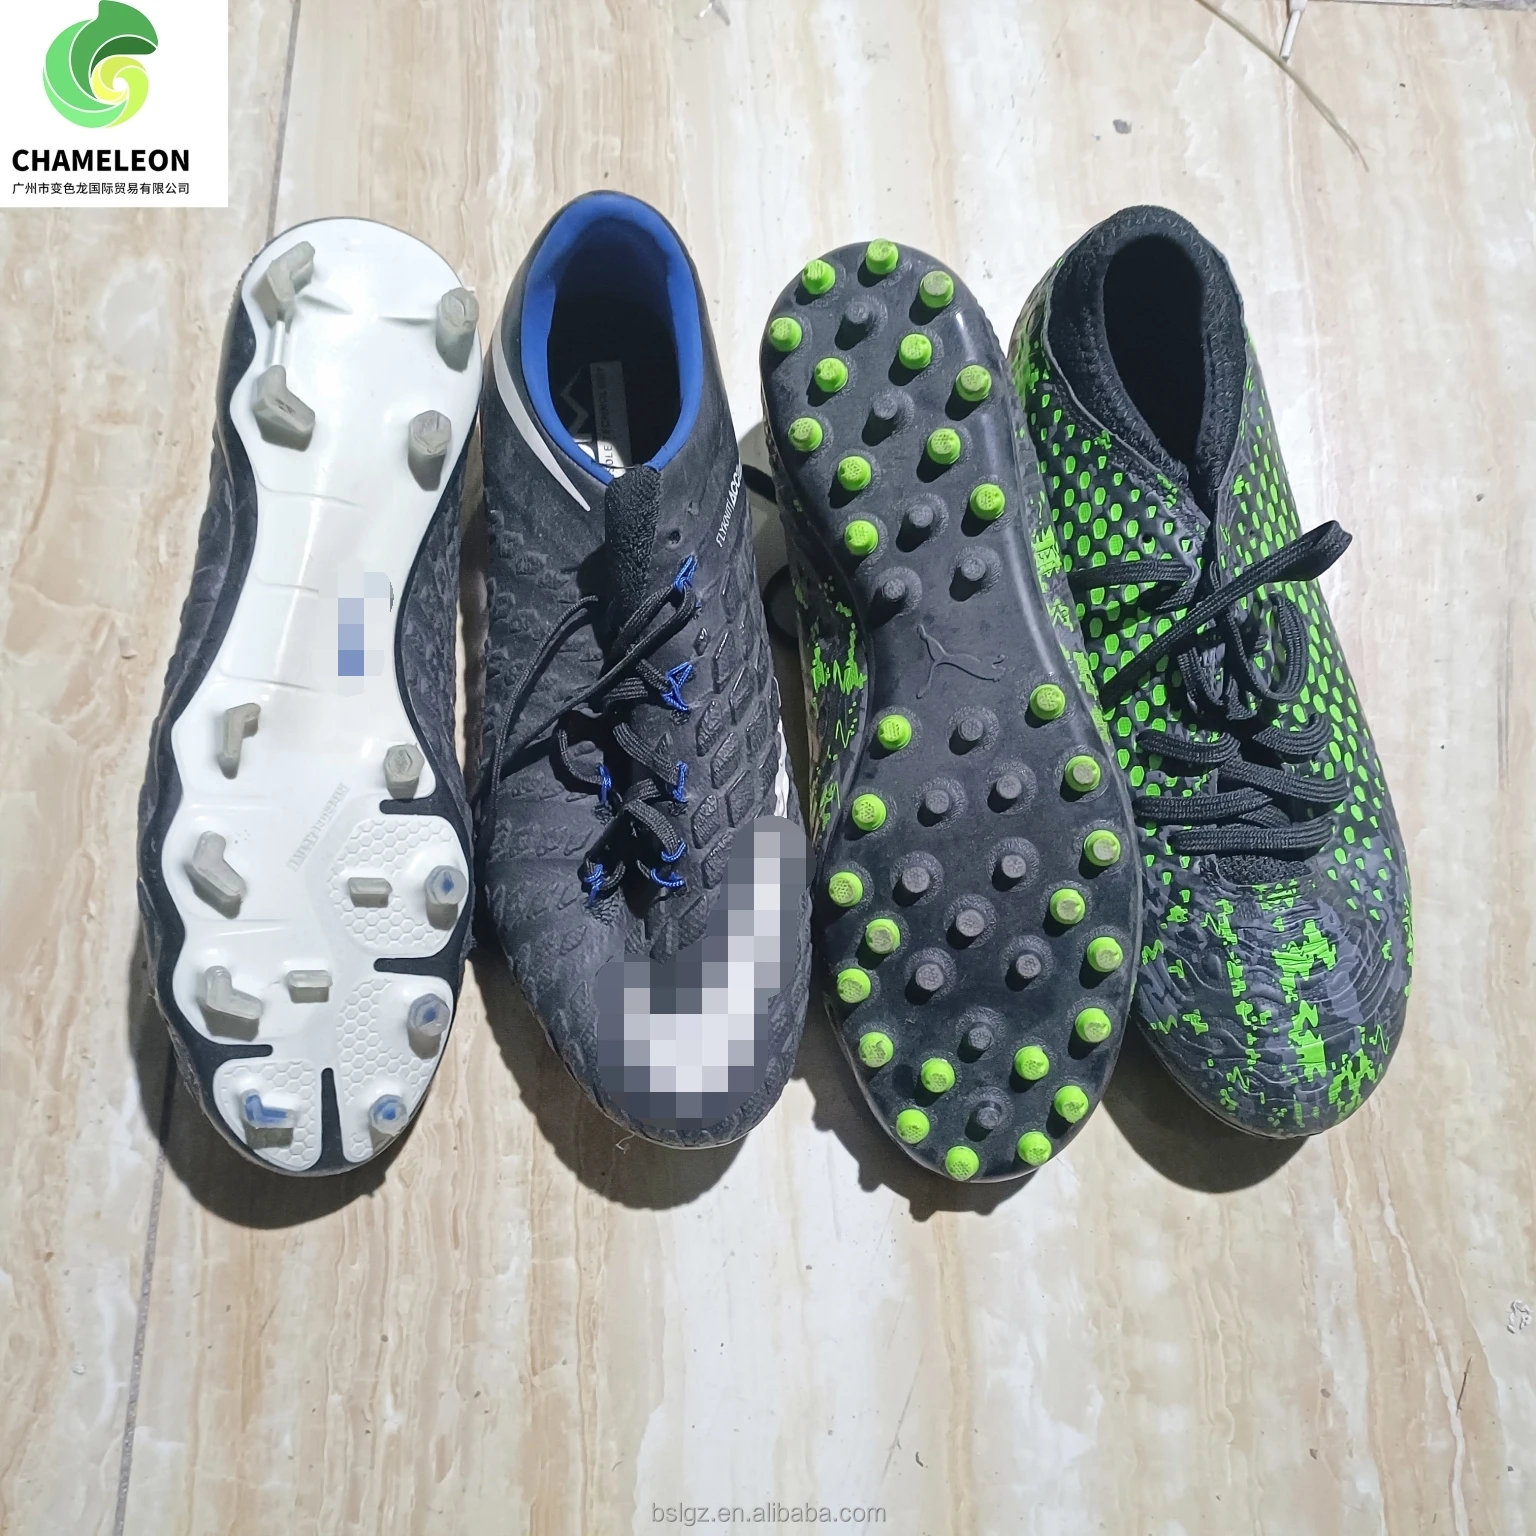 Wholesale Soccer Shoes: Affordable Football Boots